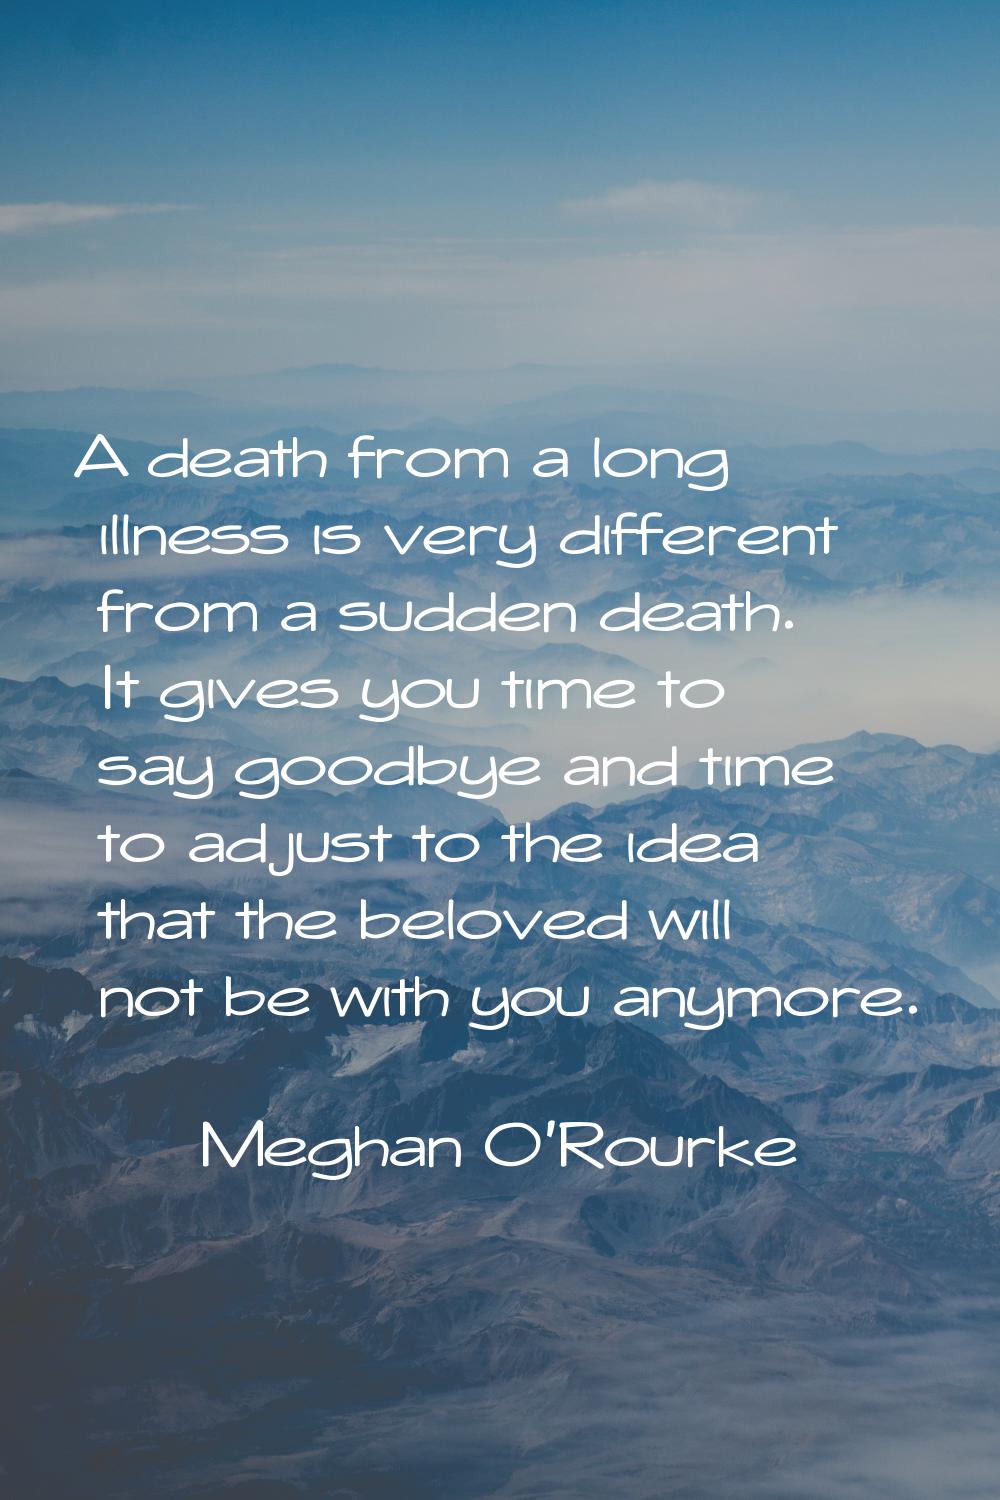 A death from a long illness is very different from a sudden death. It gives you time to say goodbye